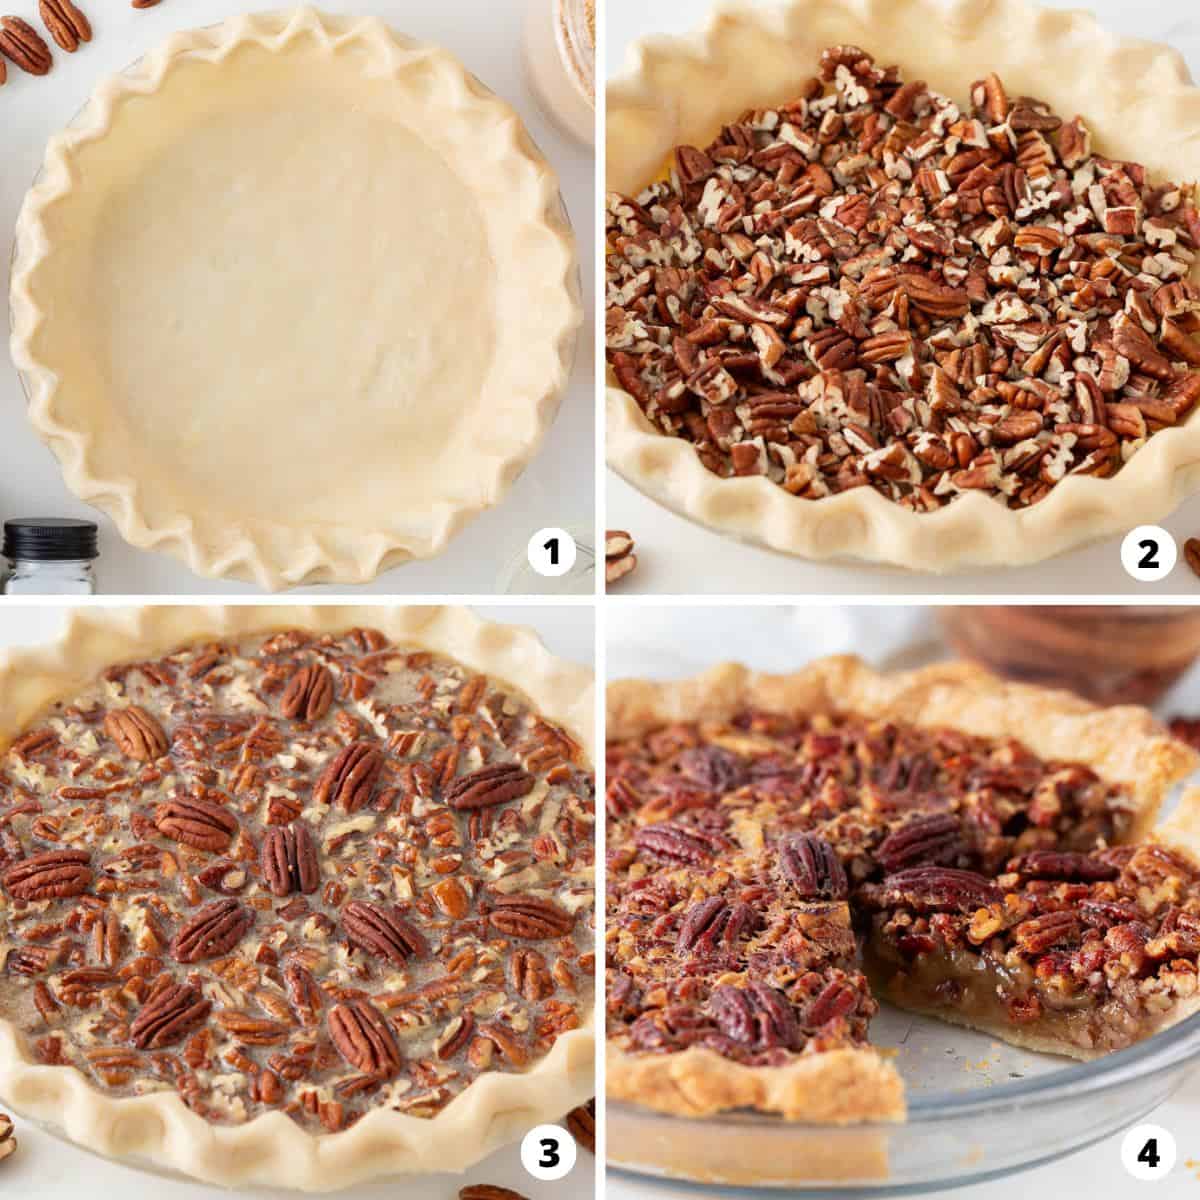 Showing how to make pecan pie in a 4 step collage.